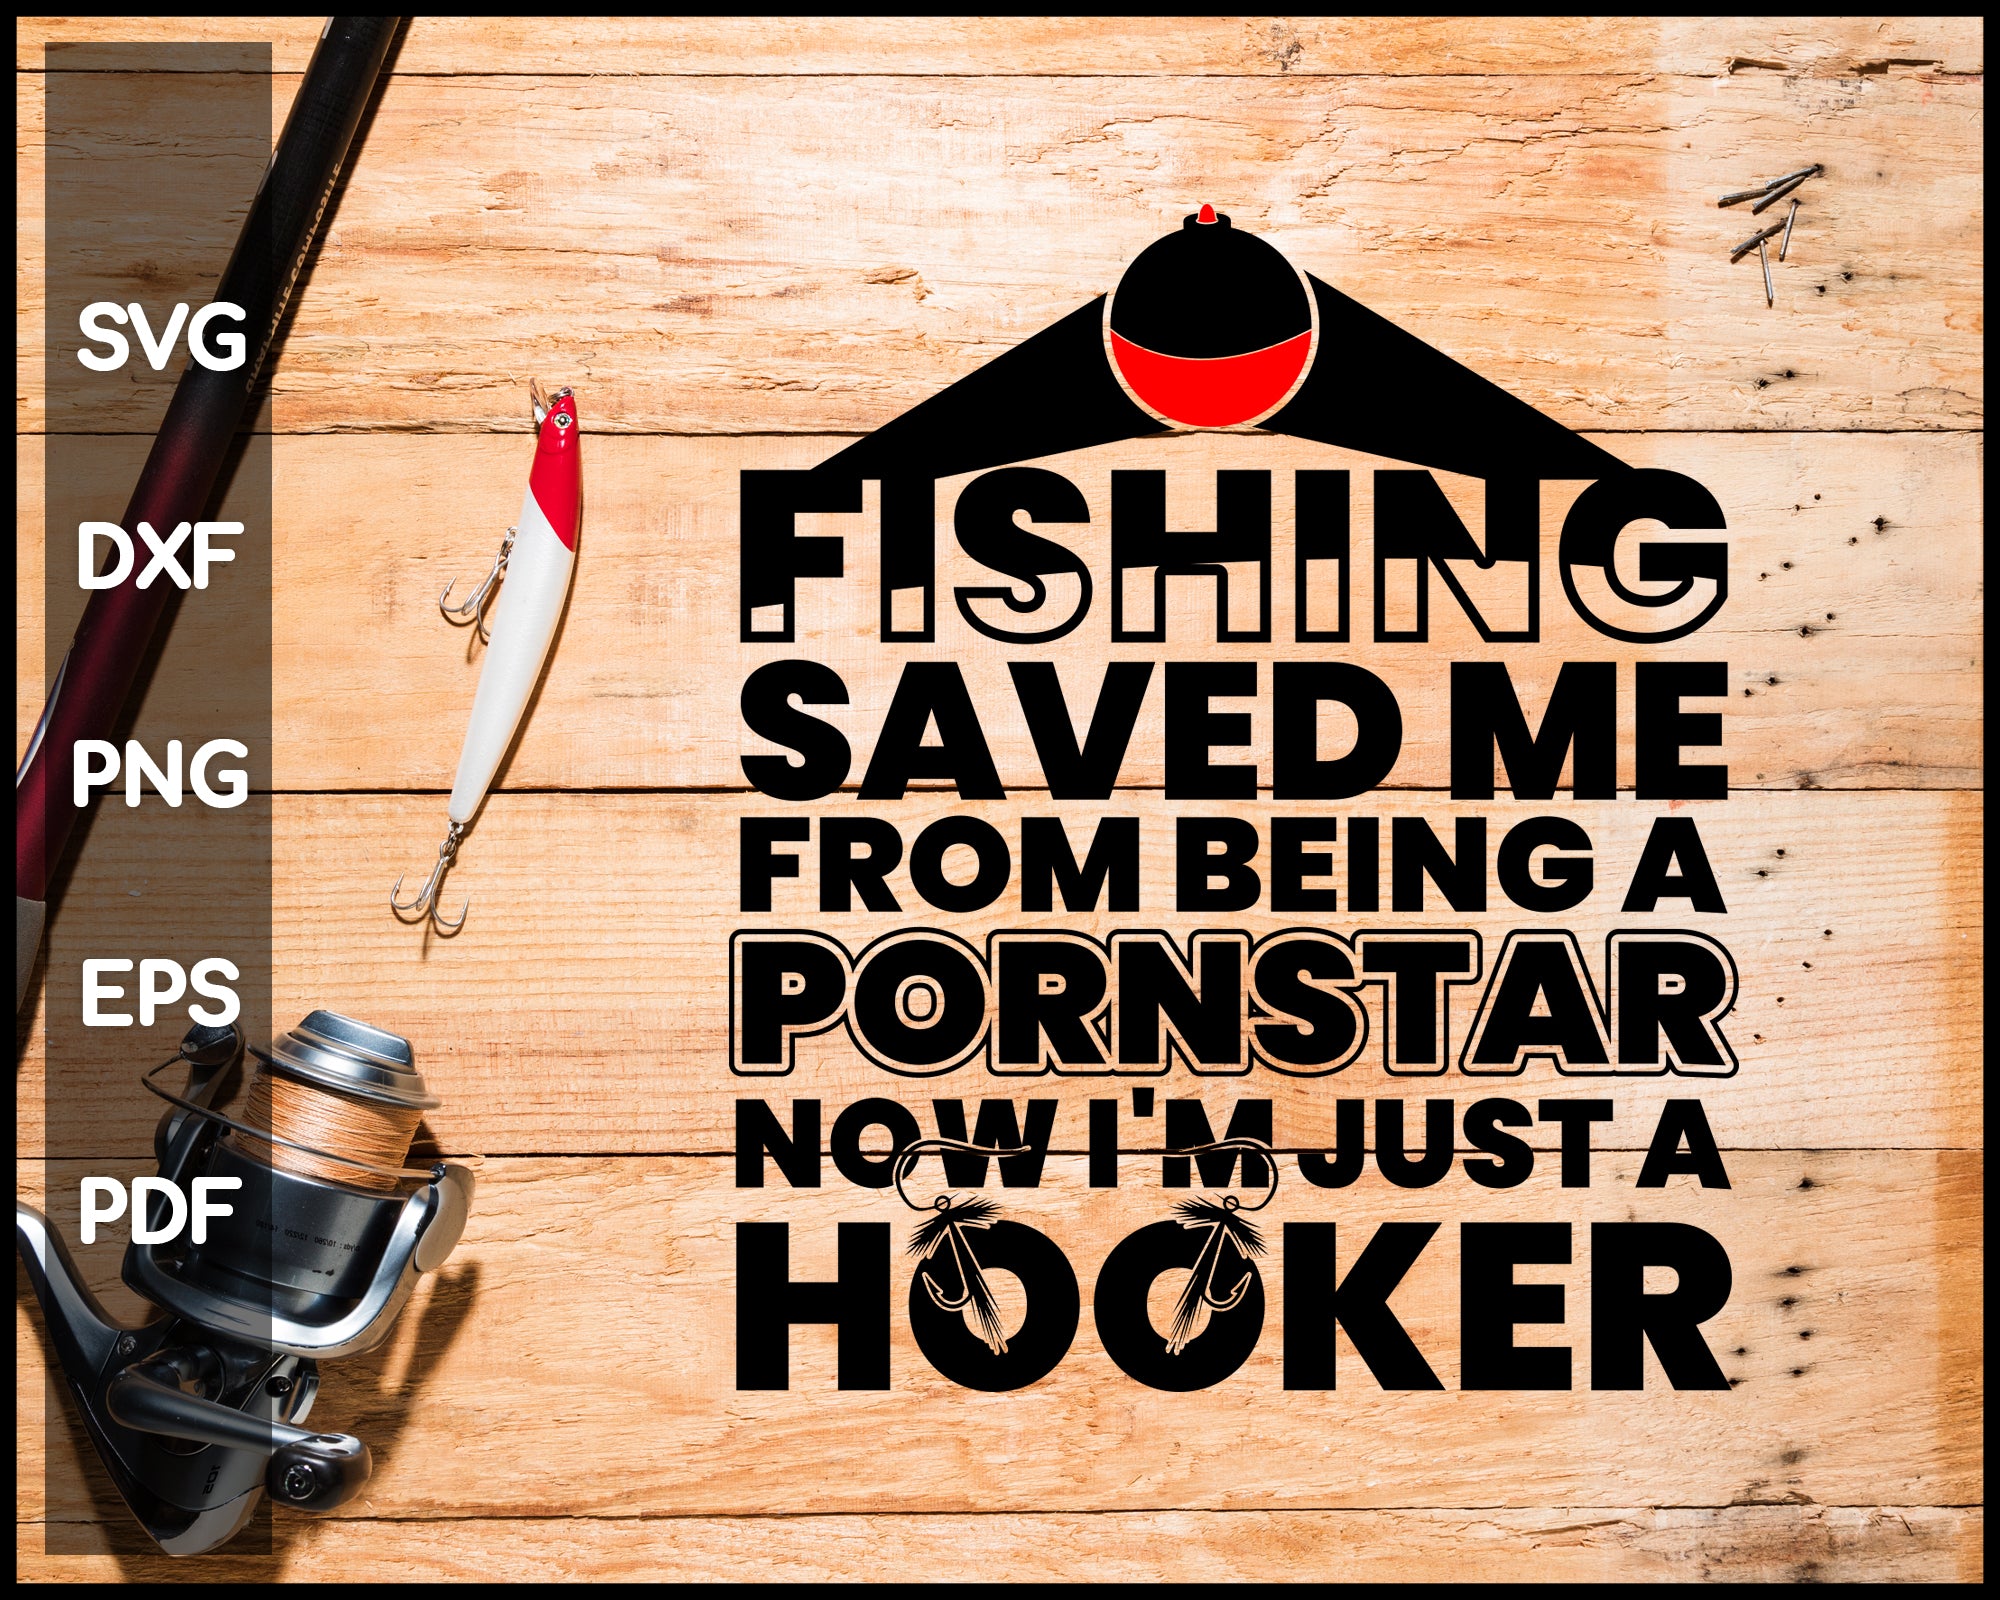  Fishing Saved Me from Being A Pornstar Now I'm Just A